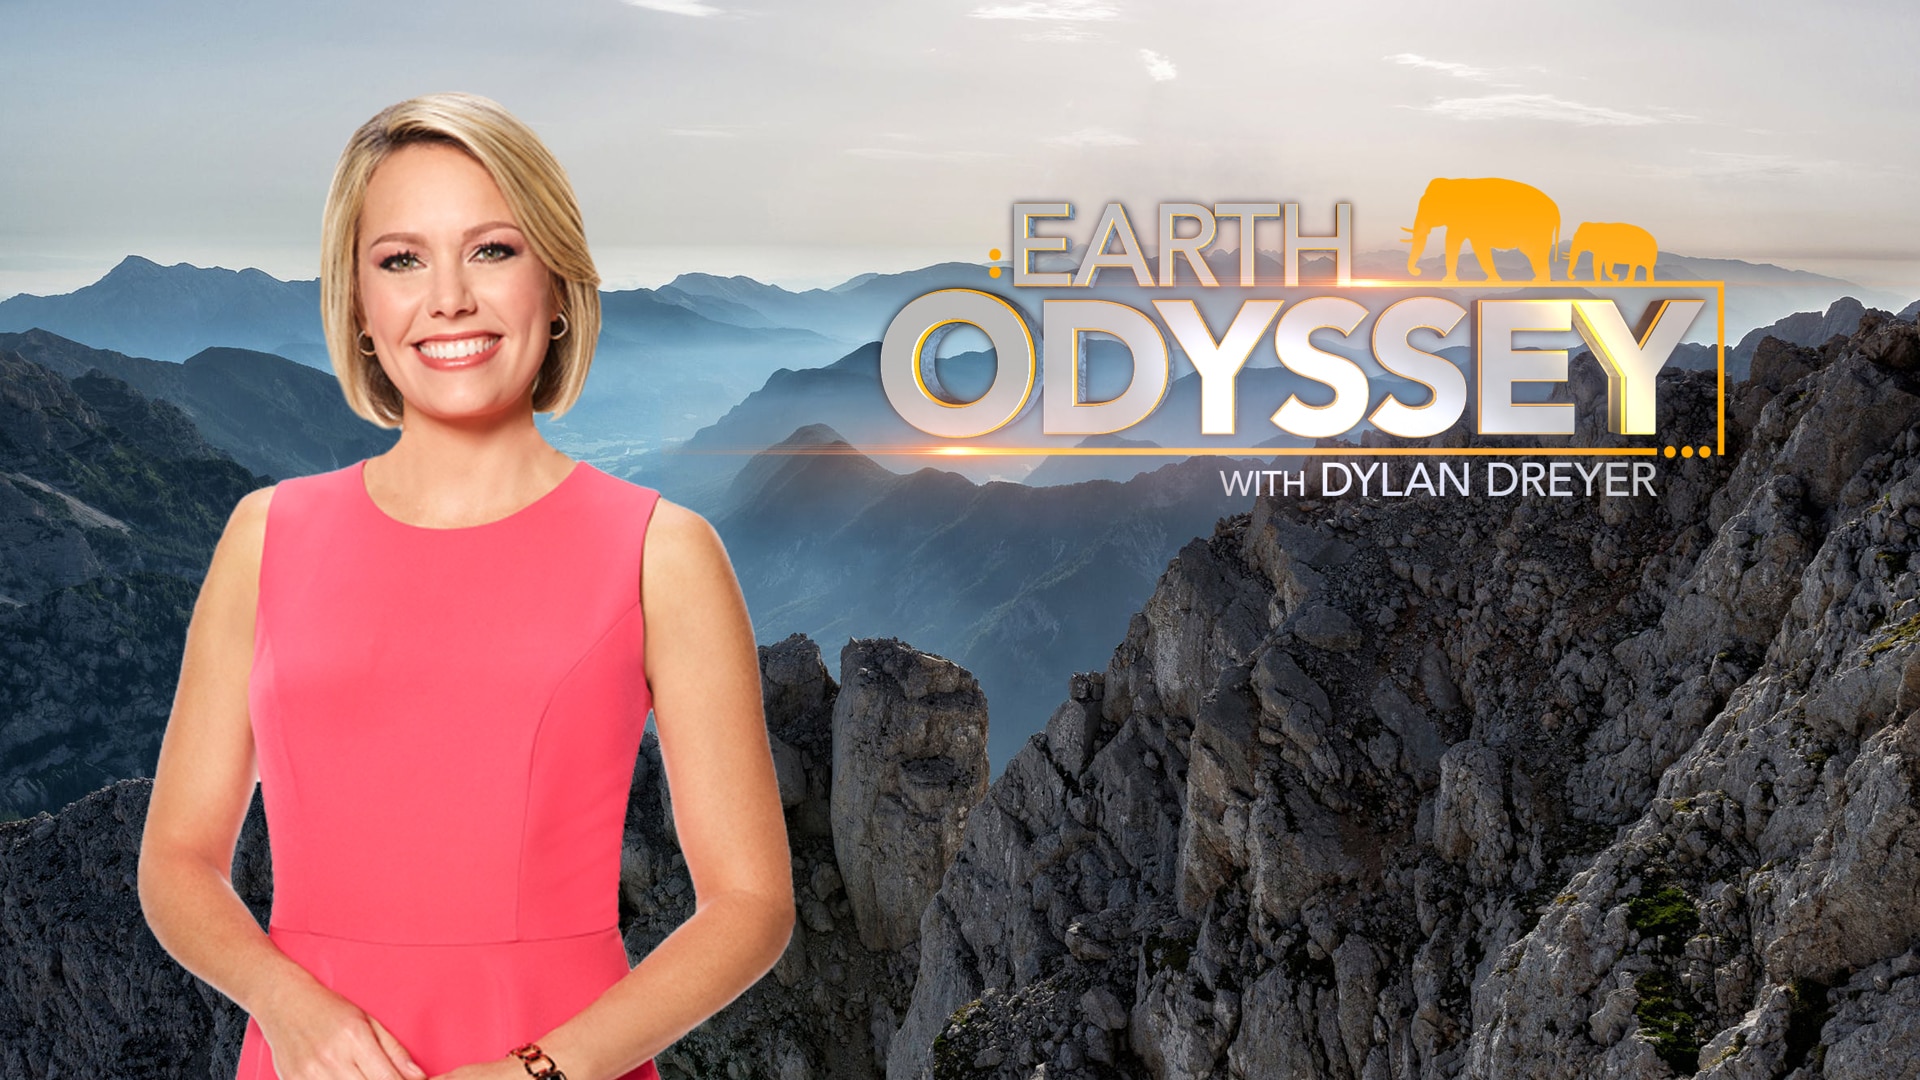 Earth Odyssey with Dylan Dreyer on FREECABLE TV